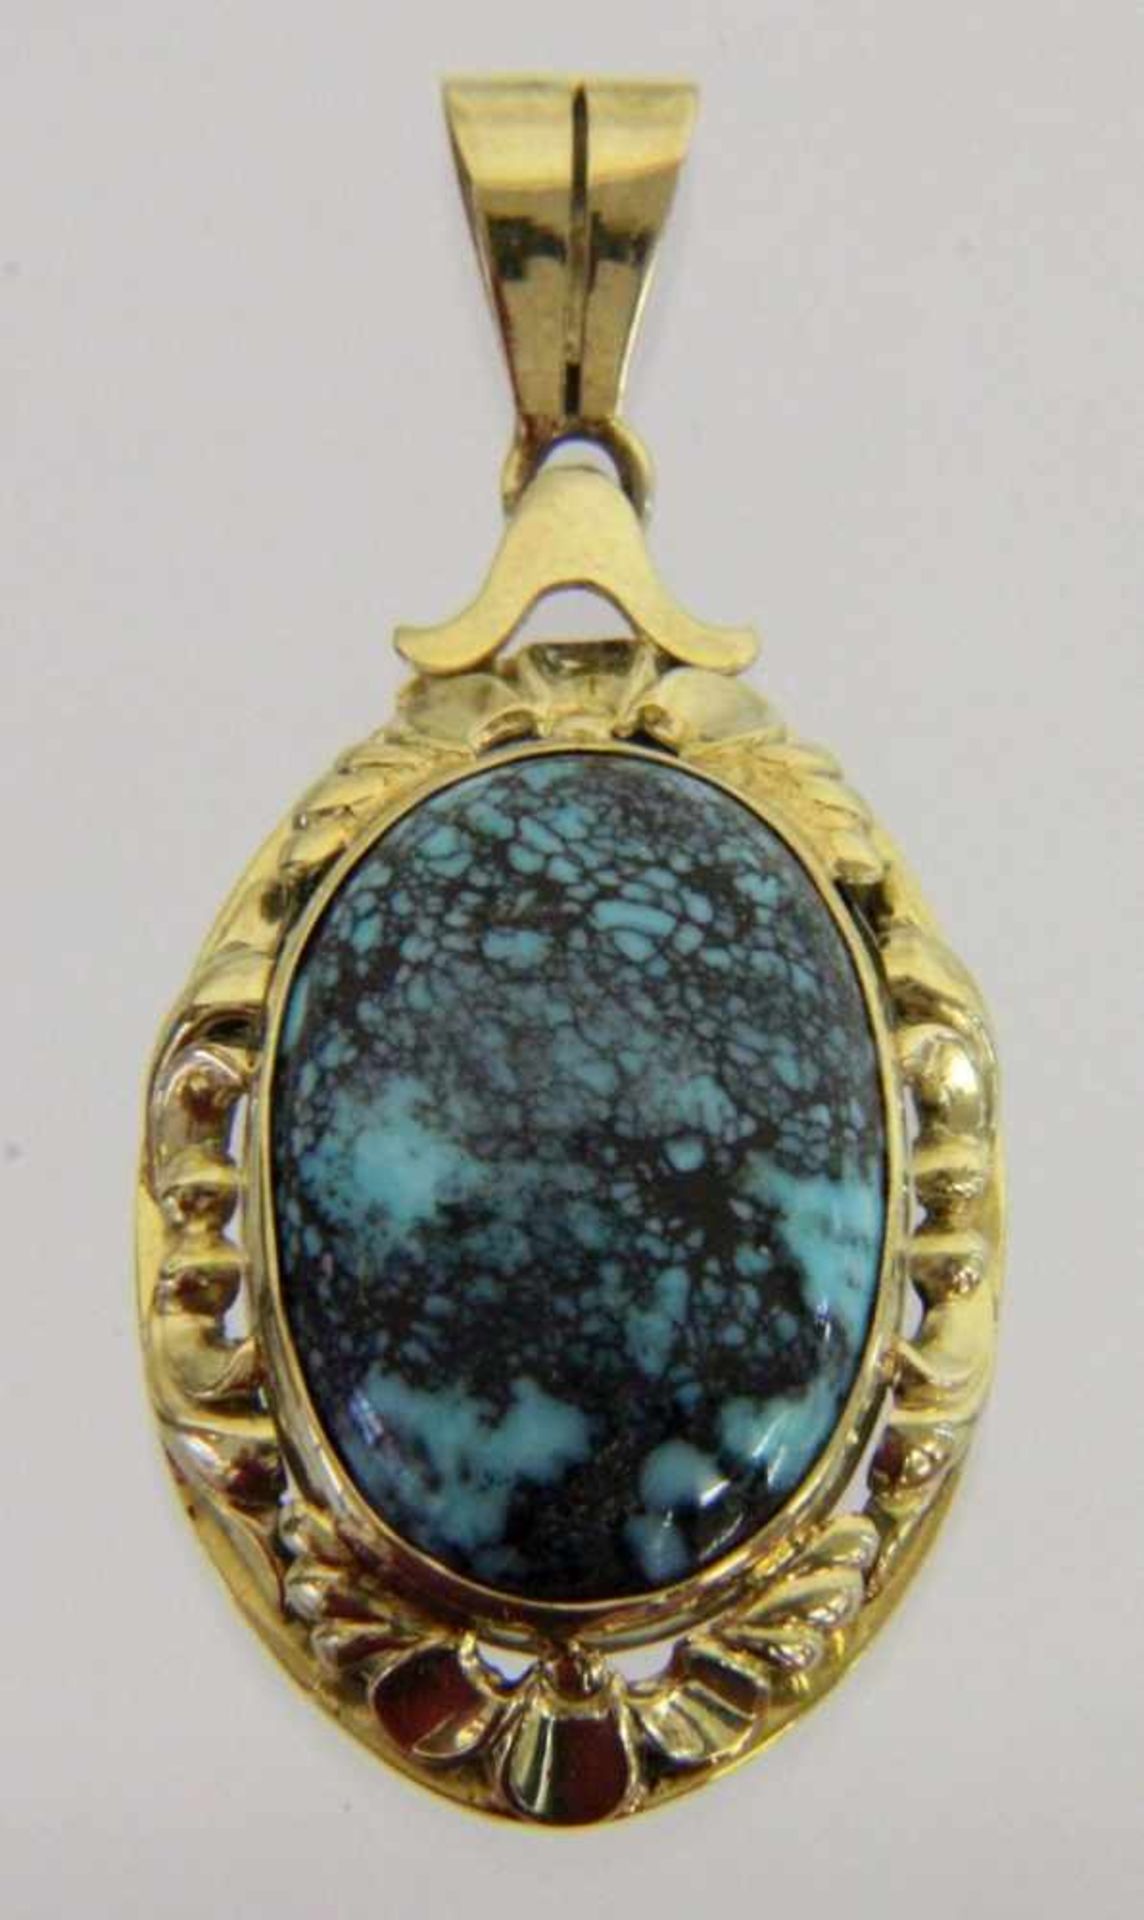 ANHÄNGER 585/000 Gelbgold mit Türkis-Cabochon. L.4,5cm A PENDANT 585/000 yellow gold set with